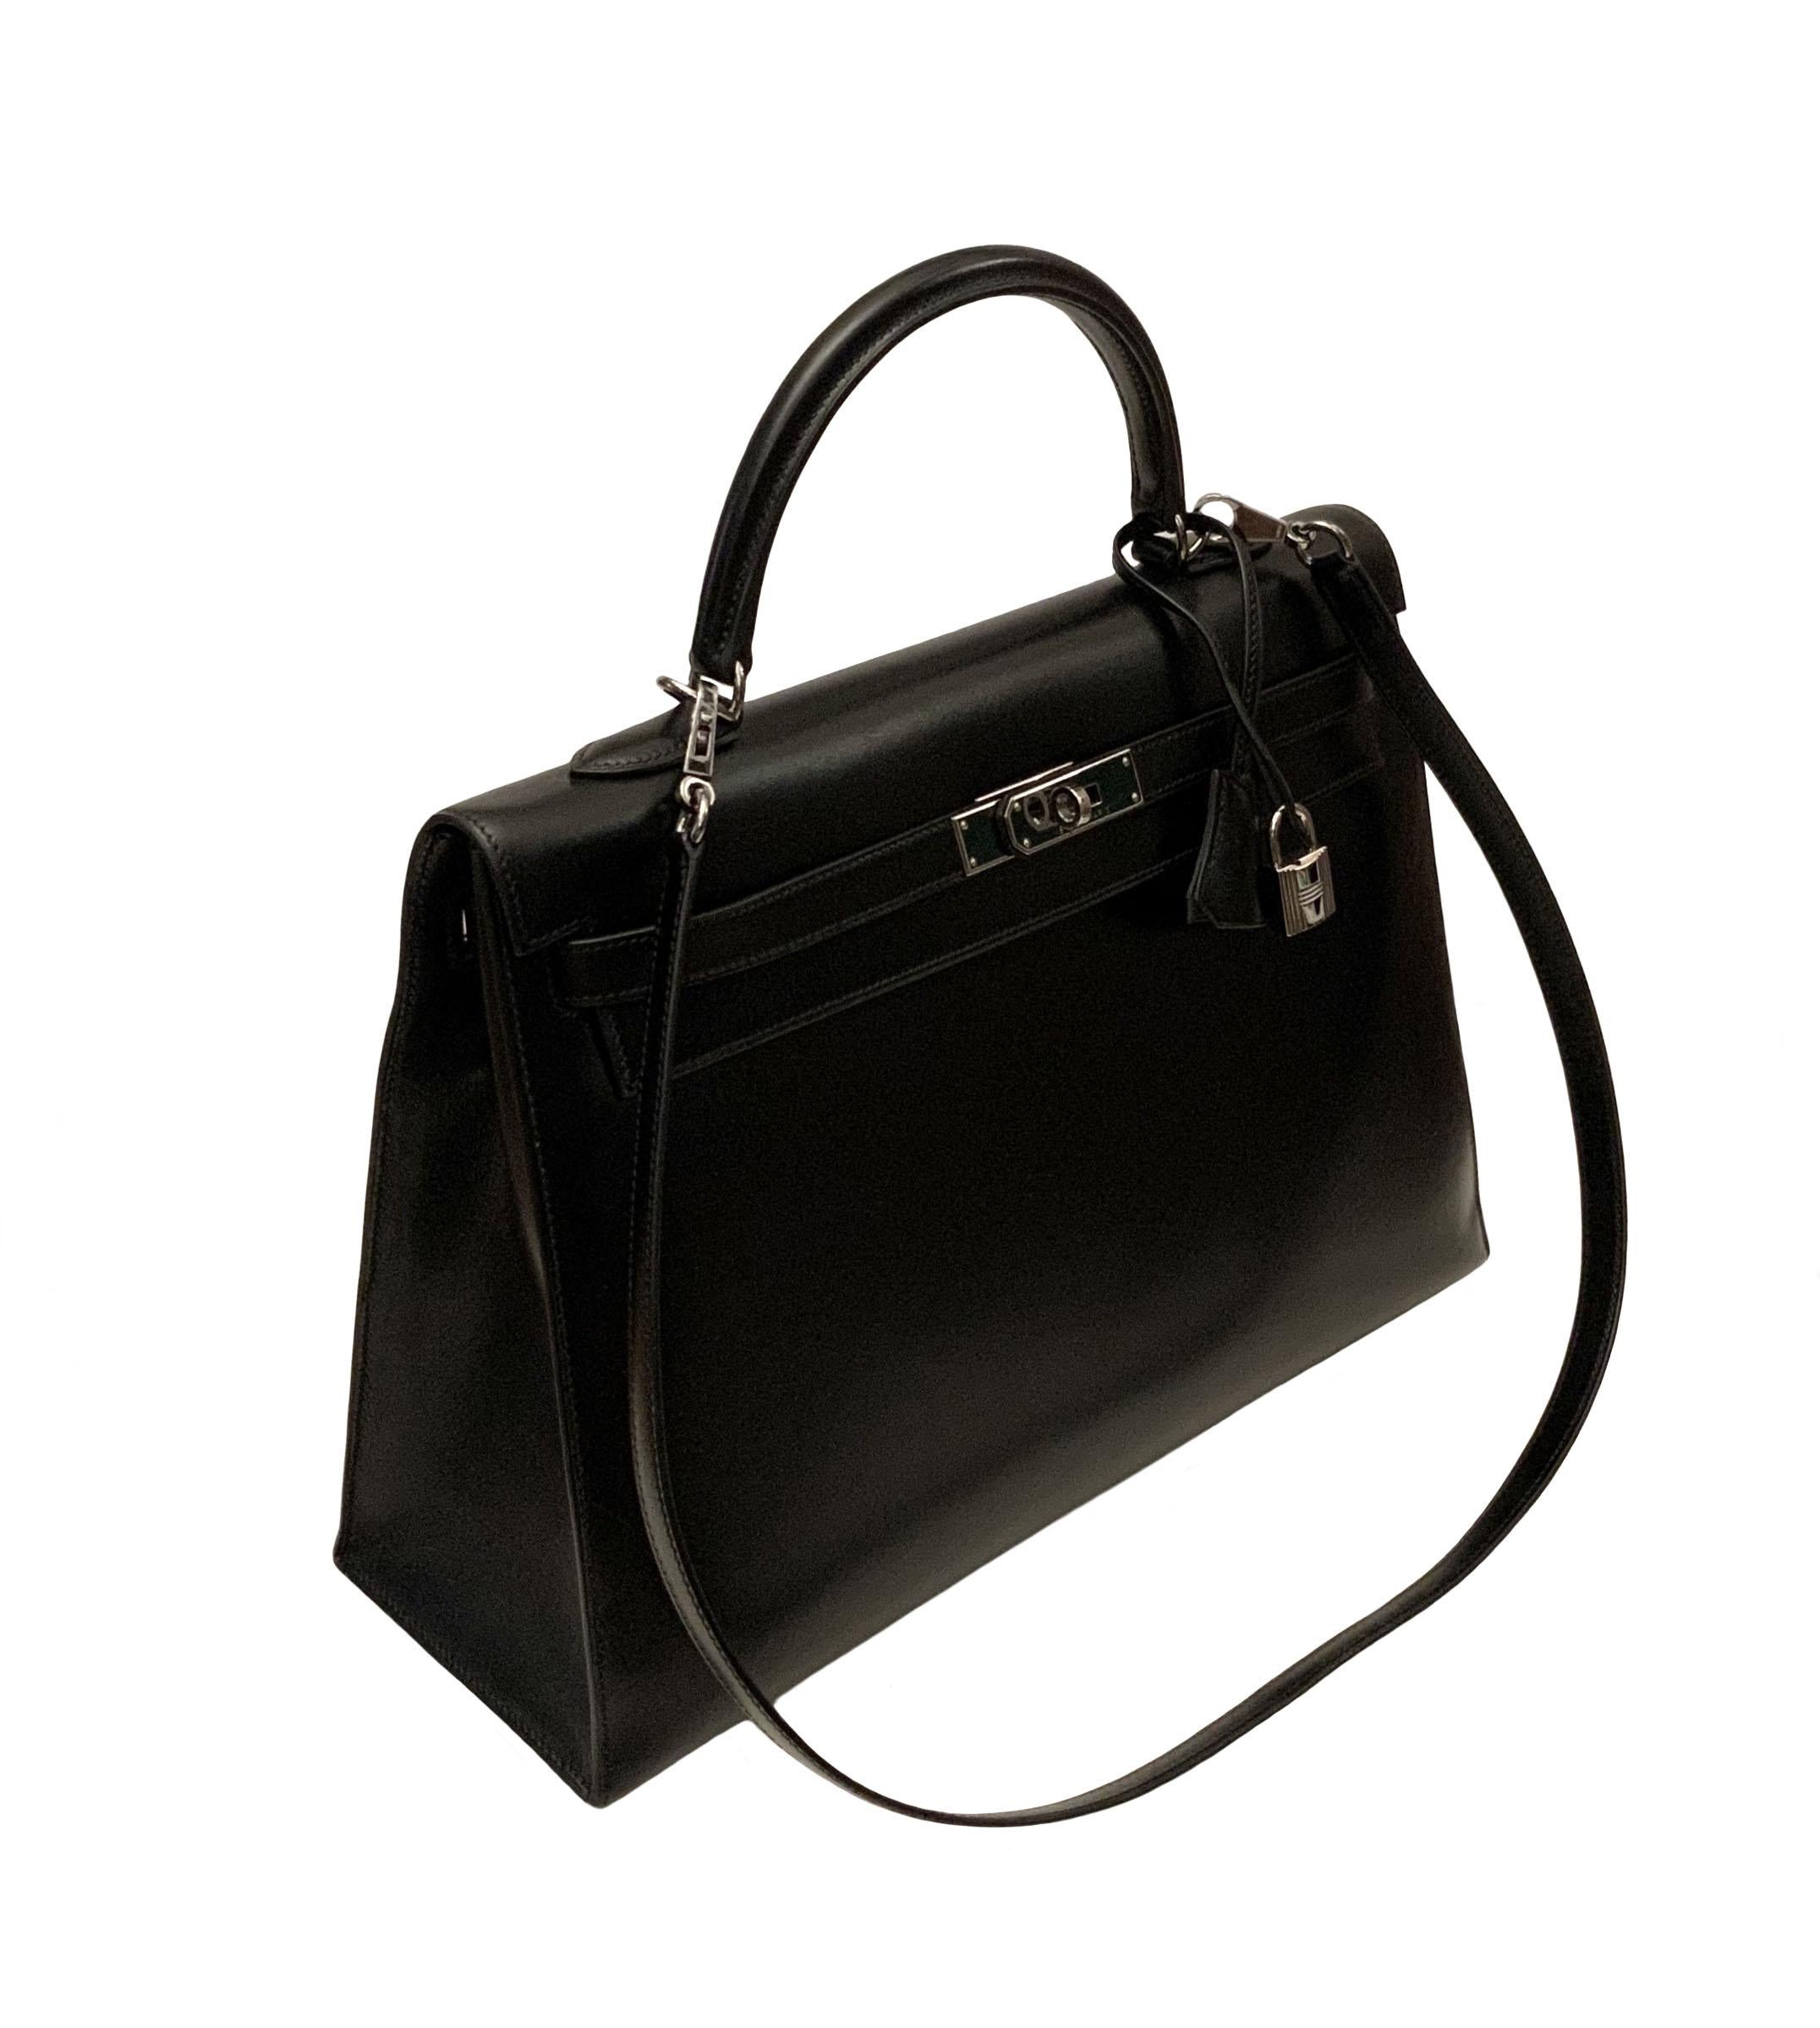 A classic and timeless from the house of Hermès, the Kelly Sellier in Box leather.
This is a 